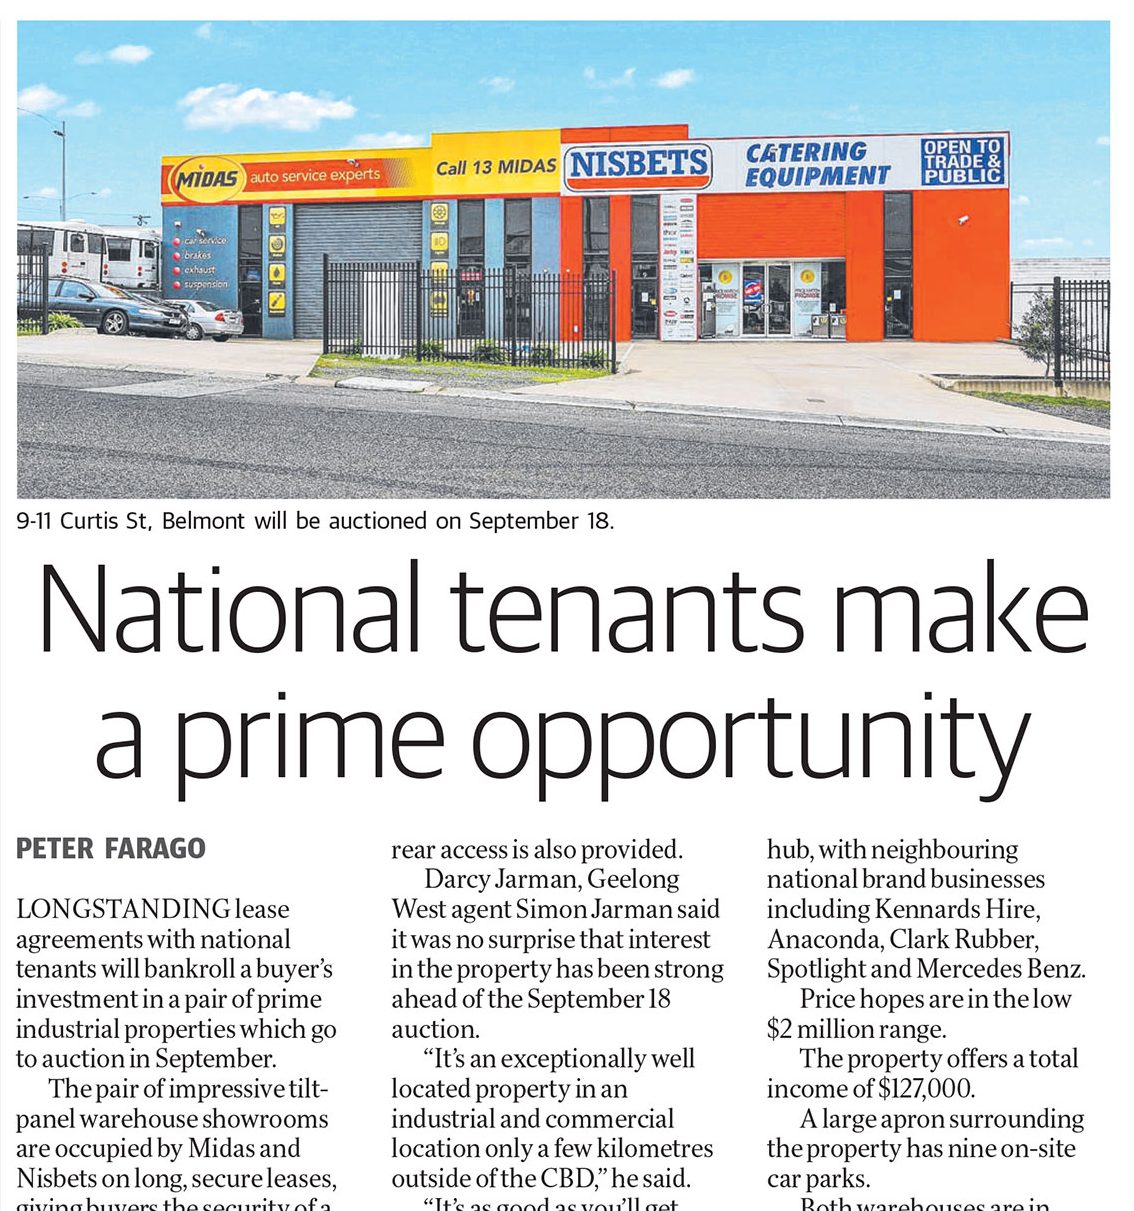 National tenants make a prime opportunity